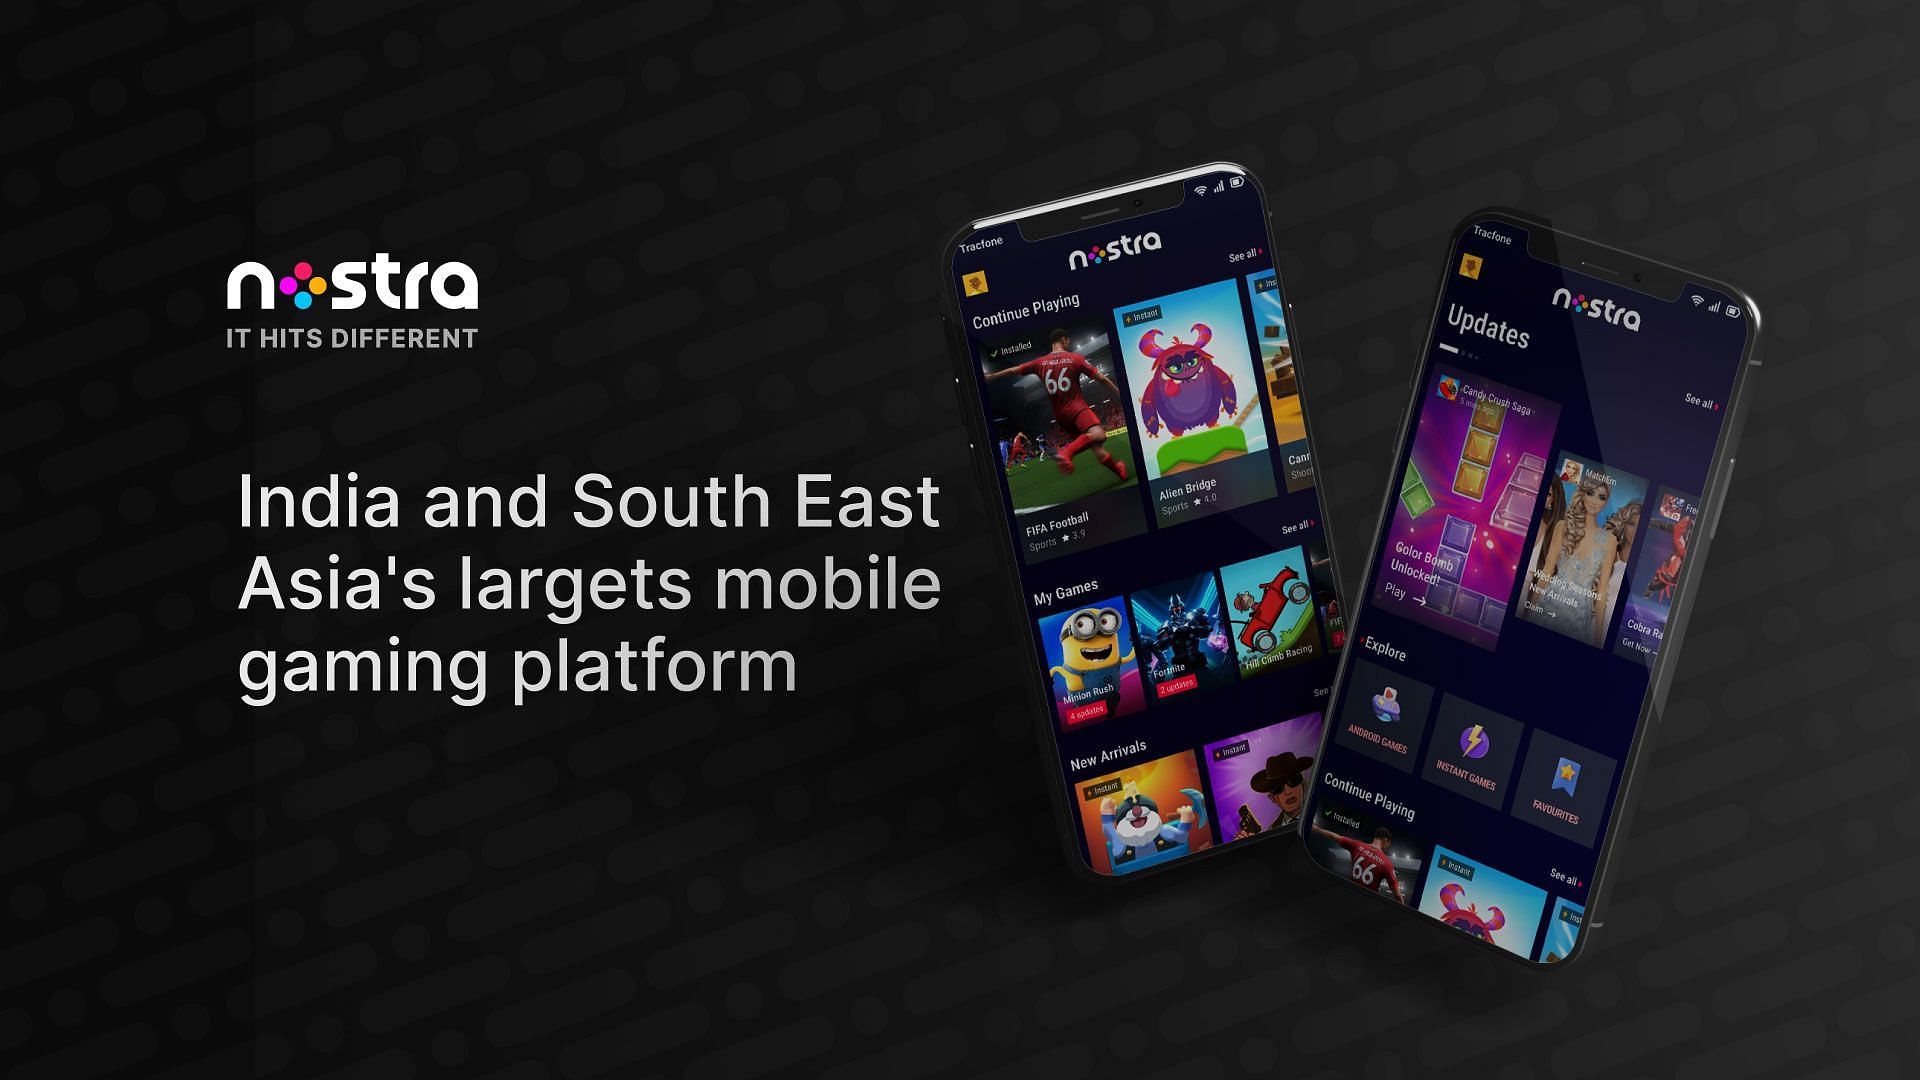 Nostra has announced new ways for gamers to catch all the entertainment (Image via Nostra)